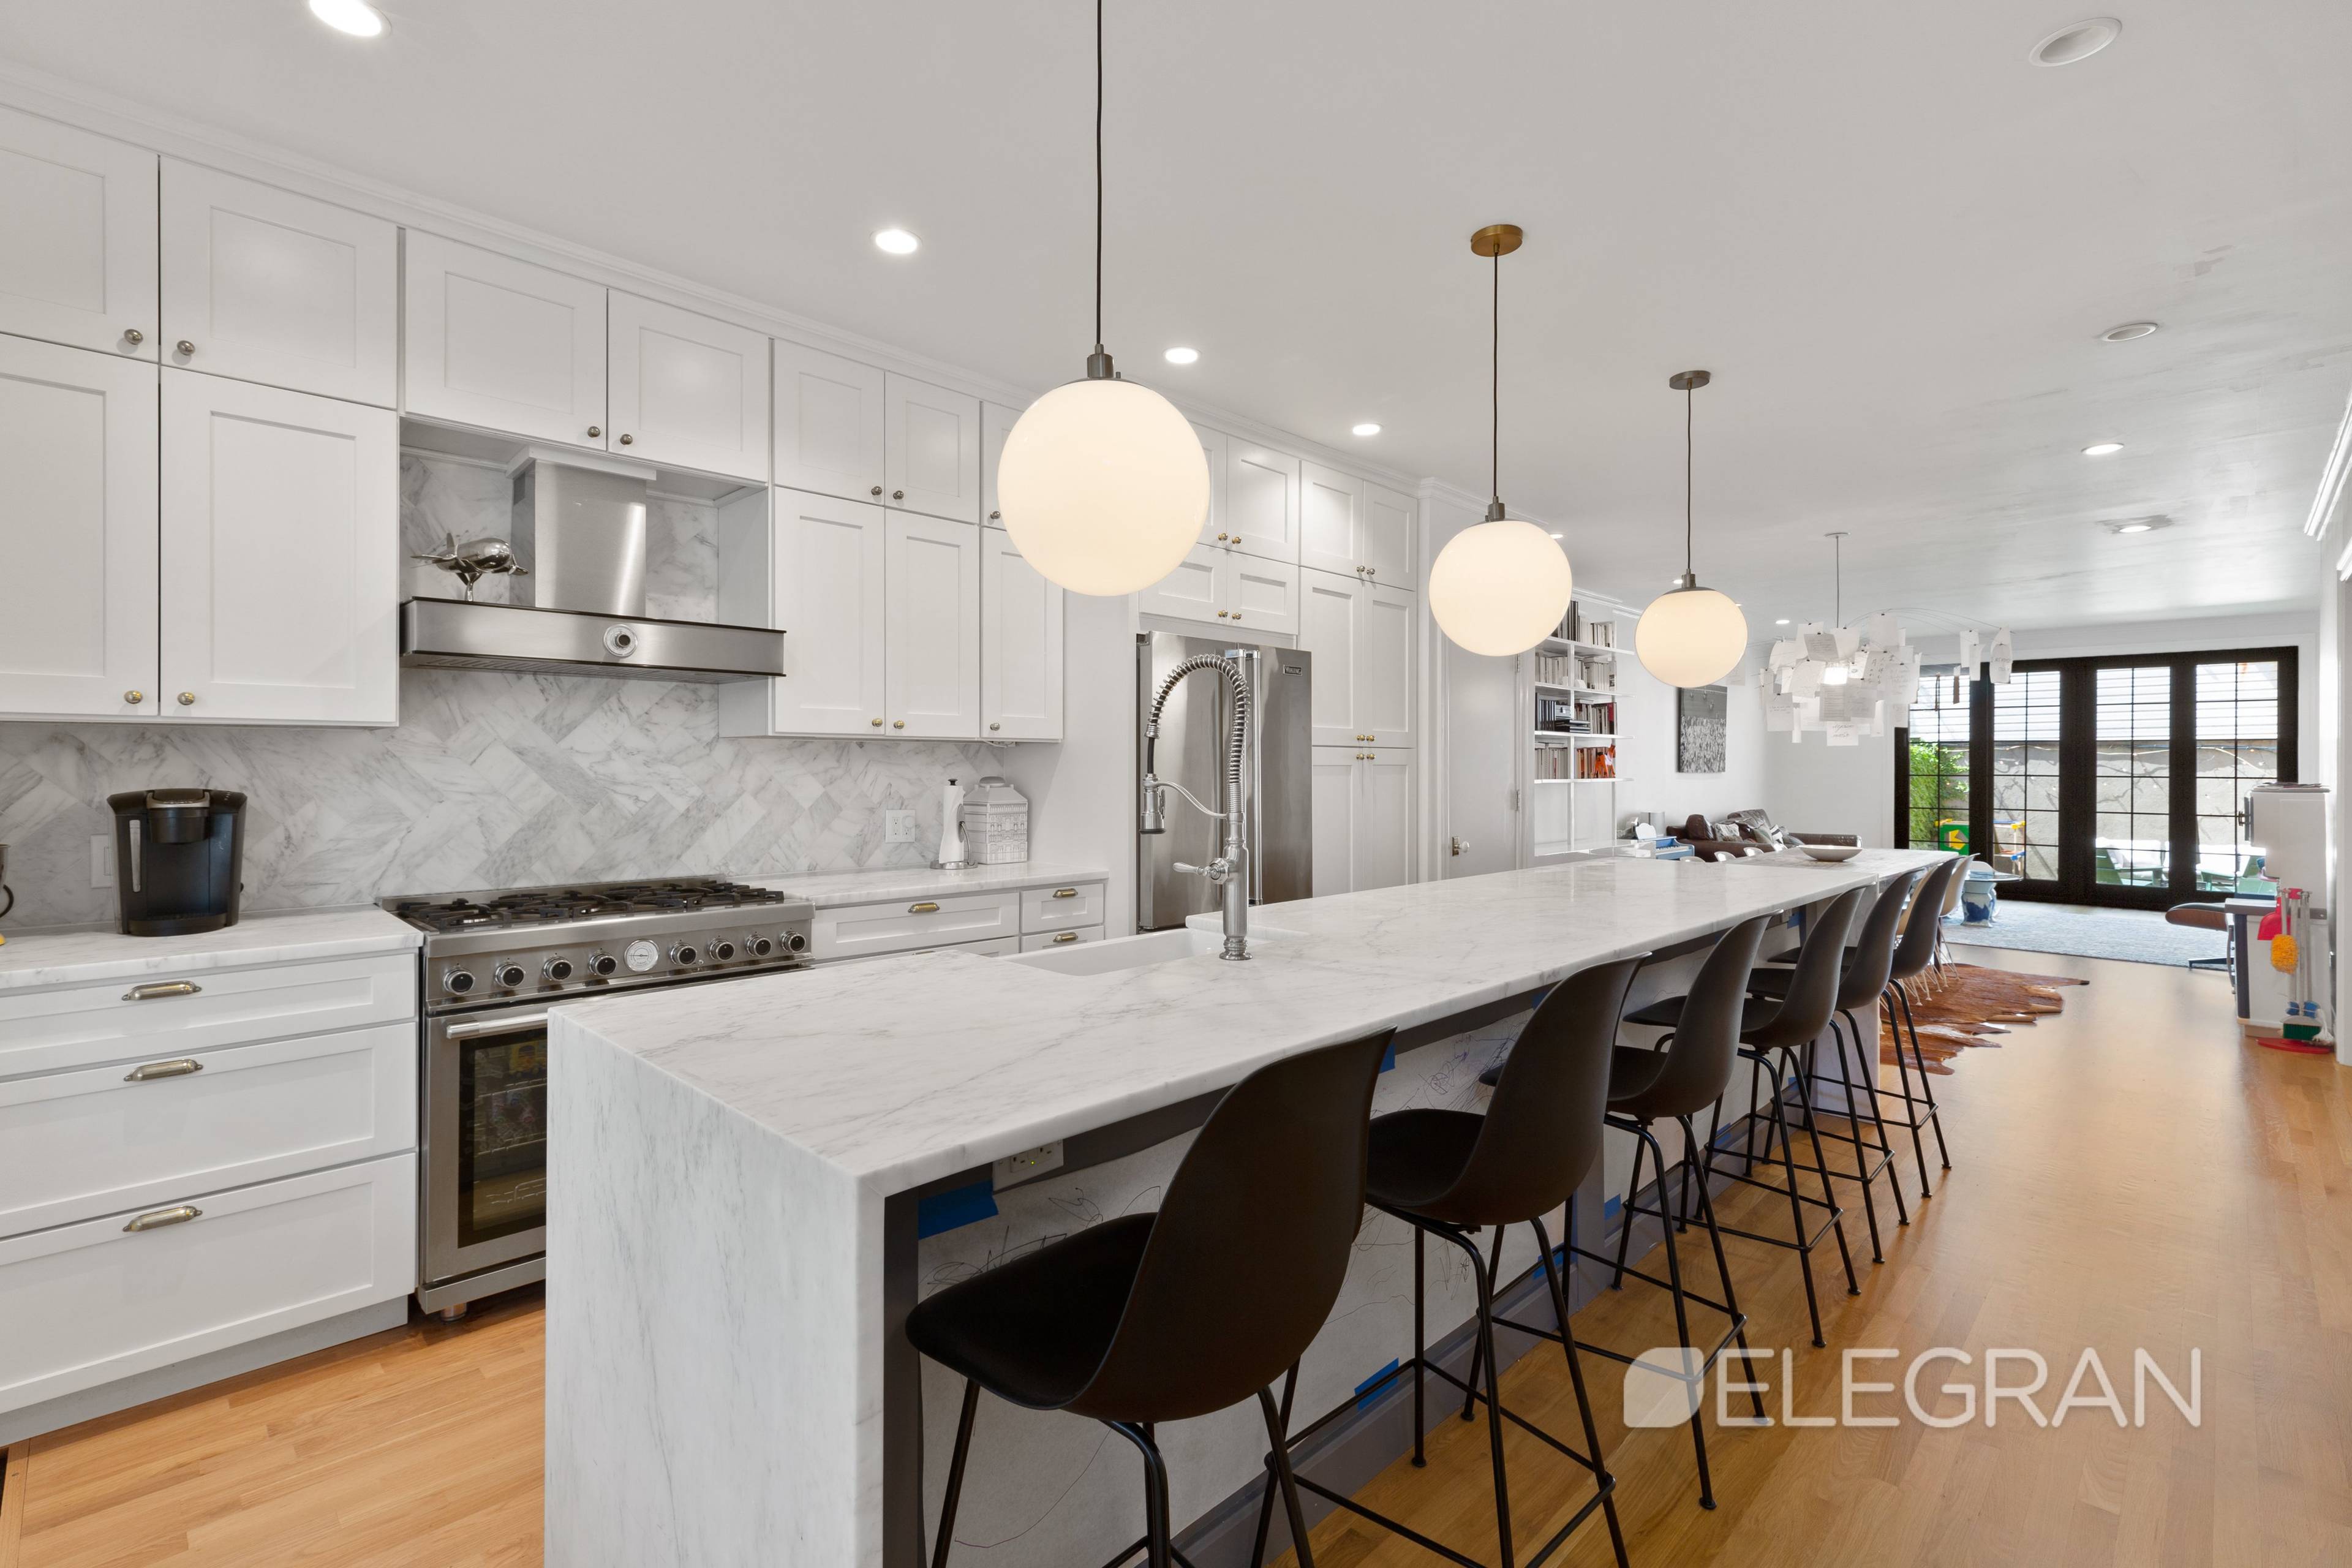 A stunning single family home, 121 Skillman is perfectly designed for living.